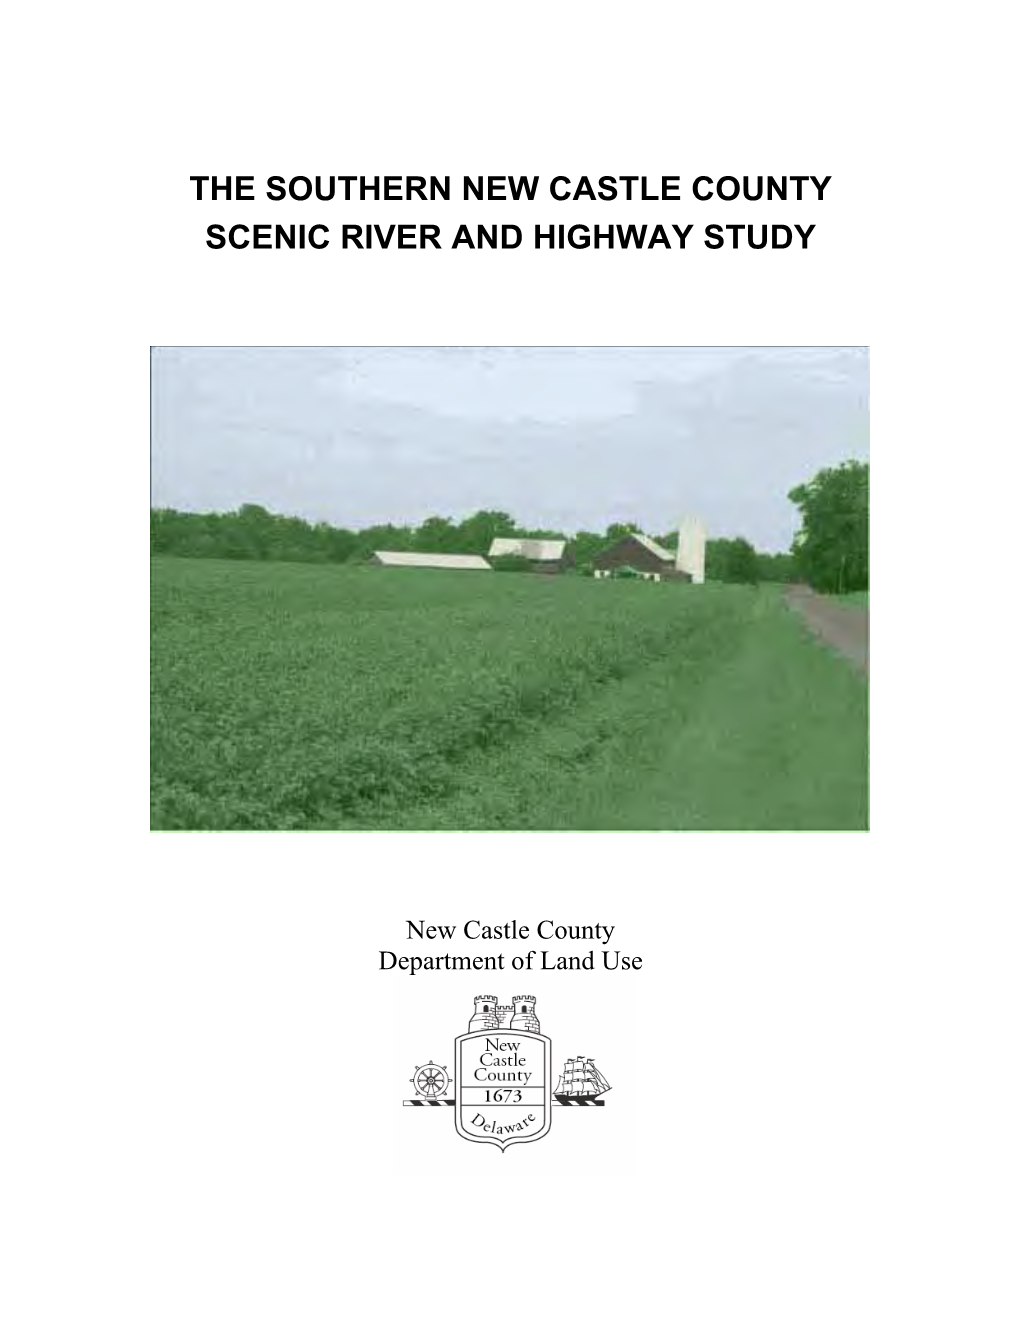 The Southern New Castle County Scenic River and Highway Study